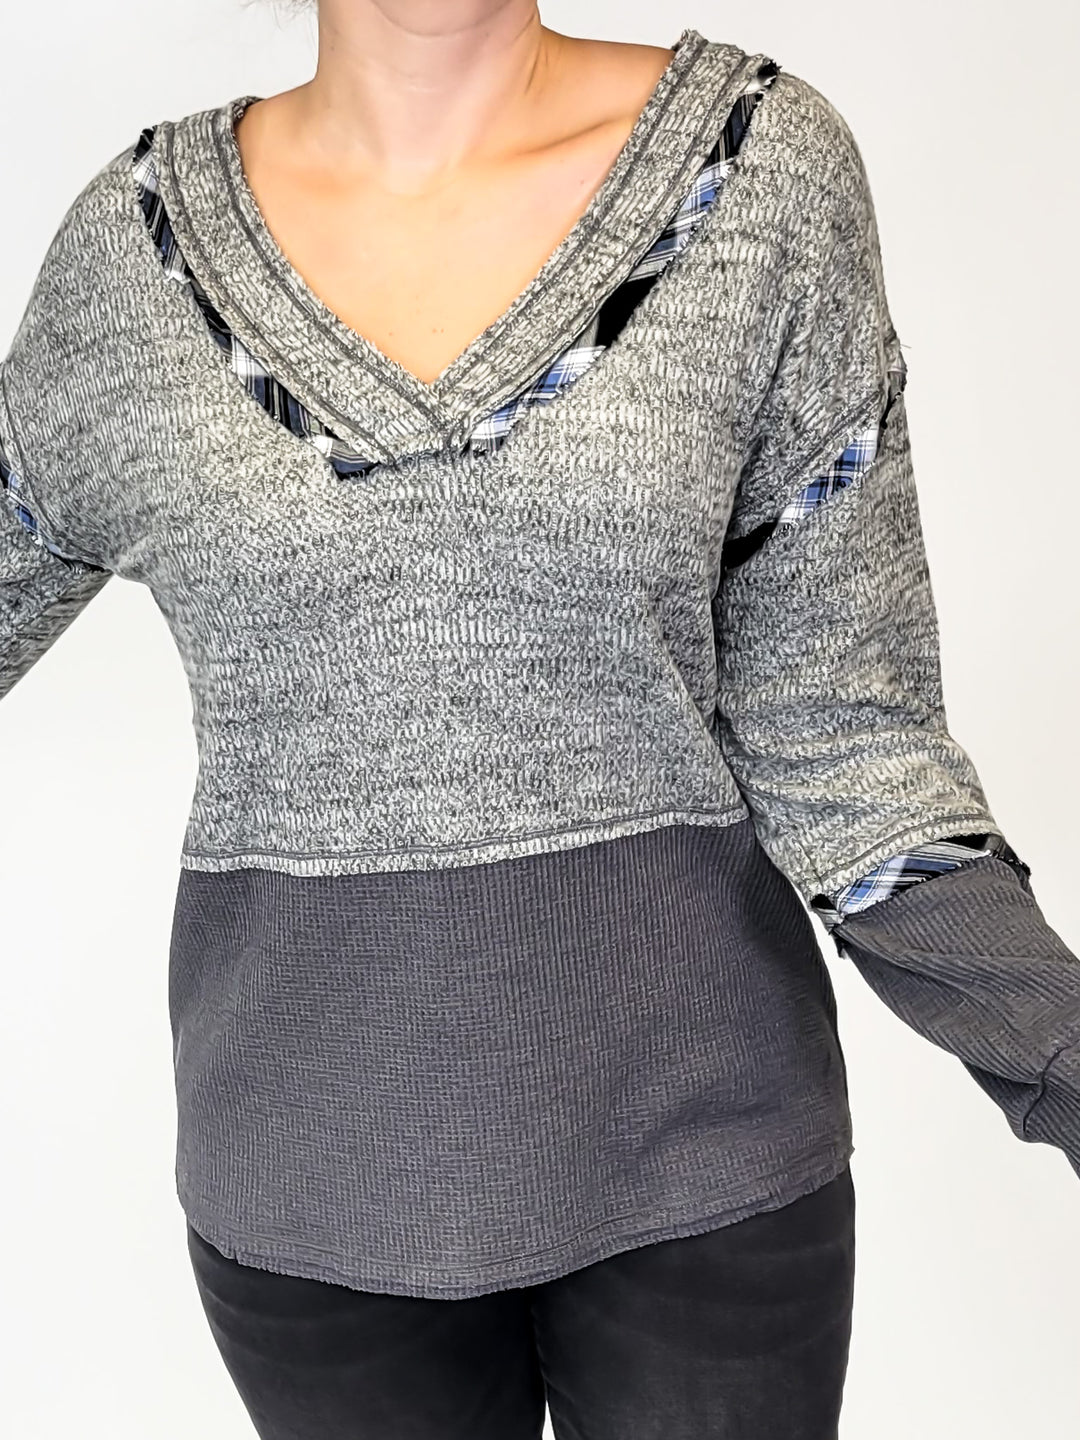 MULTI TEXTURED V-NECK PULLOVER - CHARCOAL